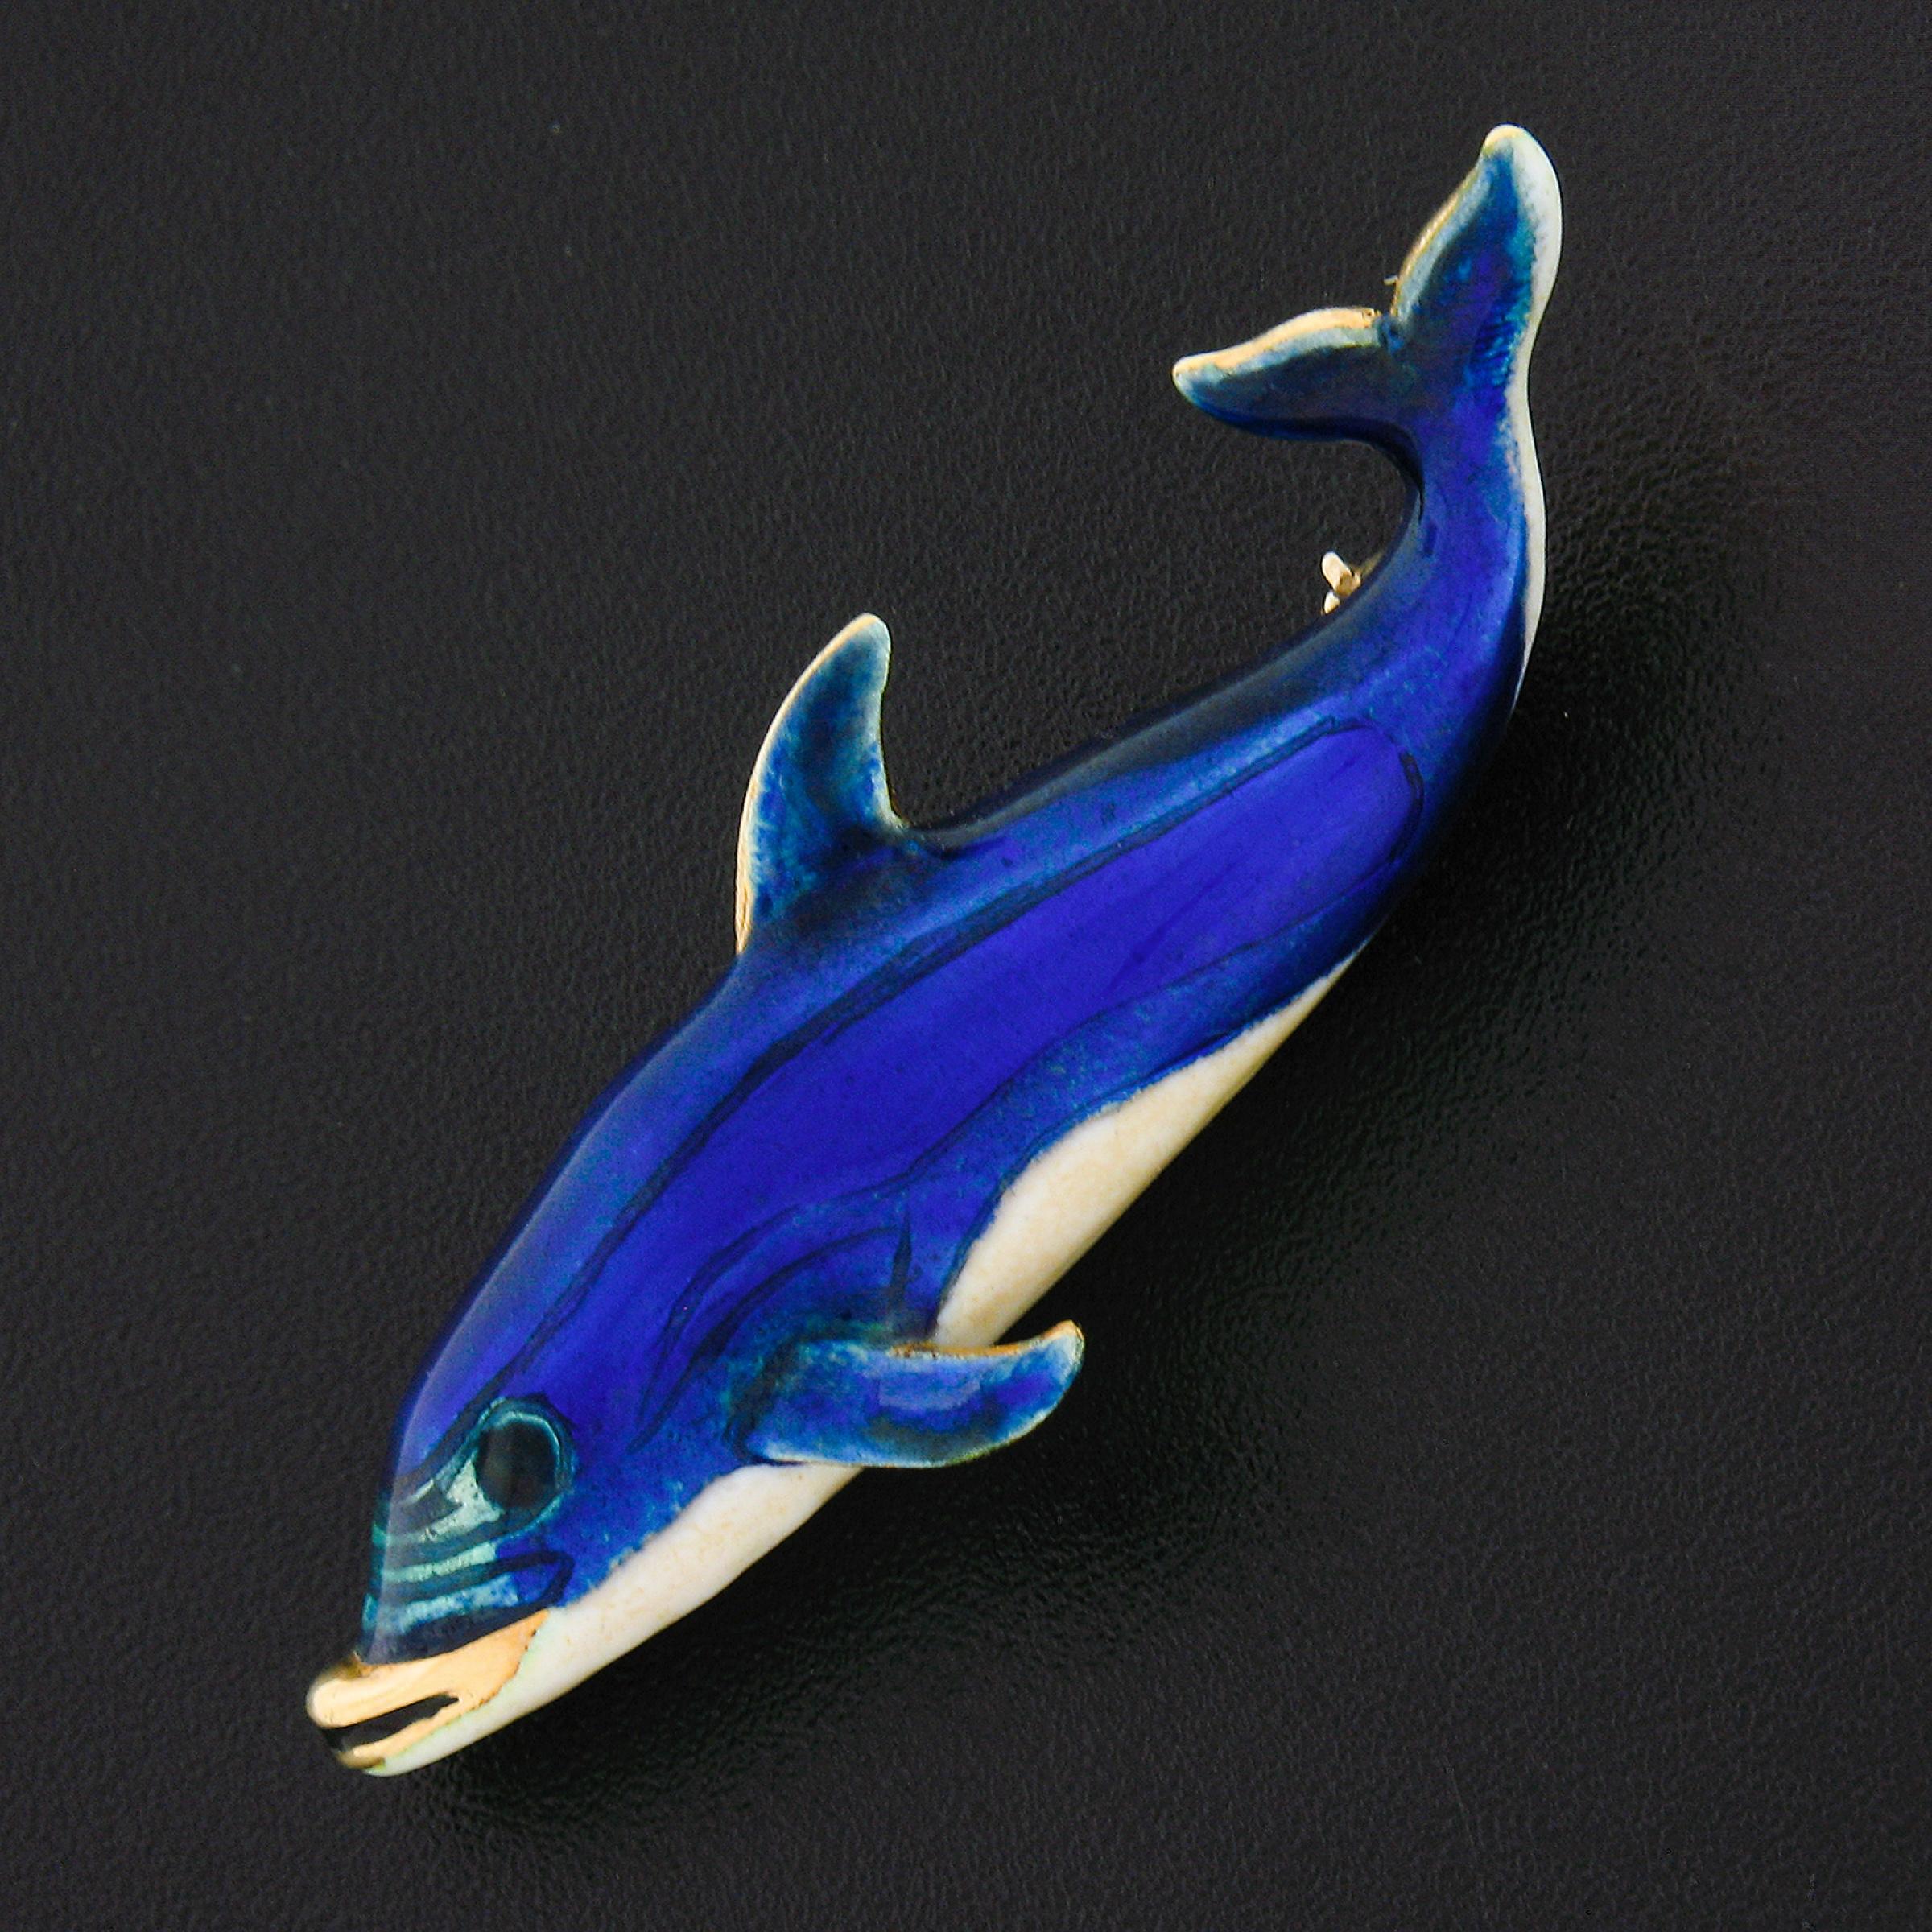 This adorable and very well made vintage pin/brooch is crafted in solid 14k yellow gold and features a gorgeous whale or dolphin design that's adorned with blue and white enamel work throughout. The back is equipped with a sturdy pin and rotating